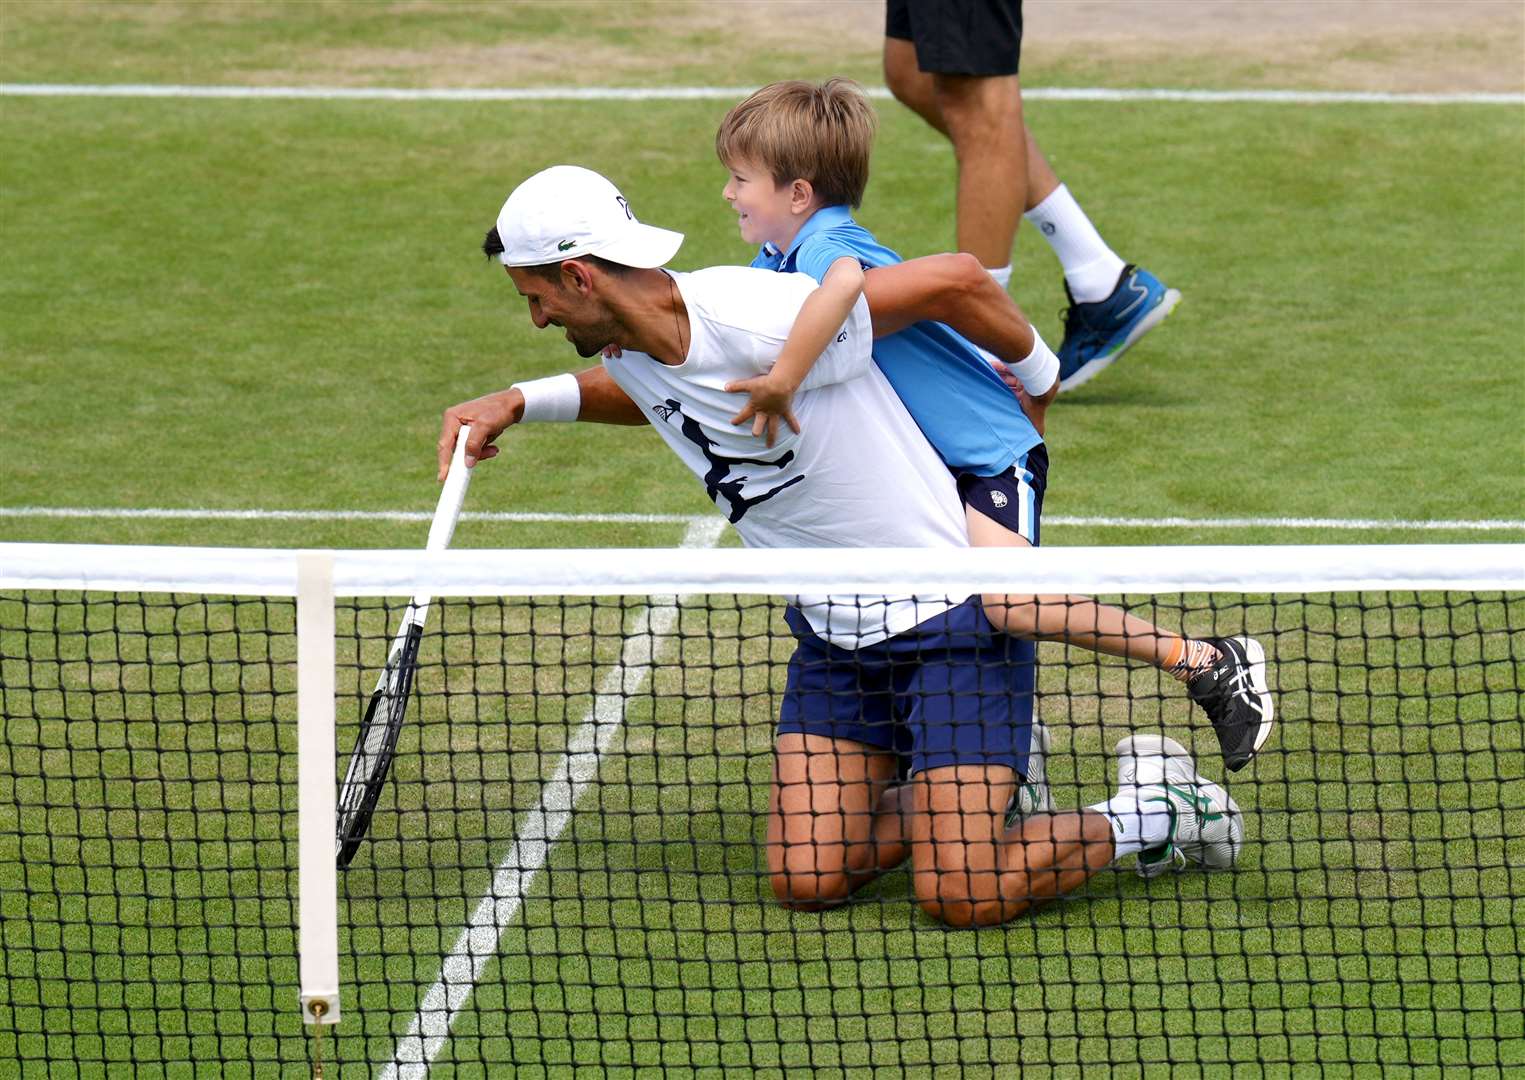 Novak Djokovic and his son during his practice session on day eight of the 2022 Wimbledon Championships (John Walton/PA)